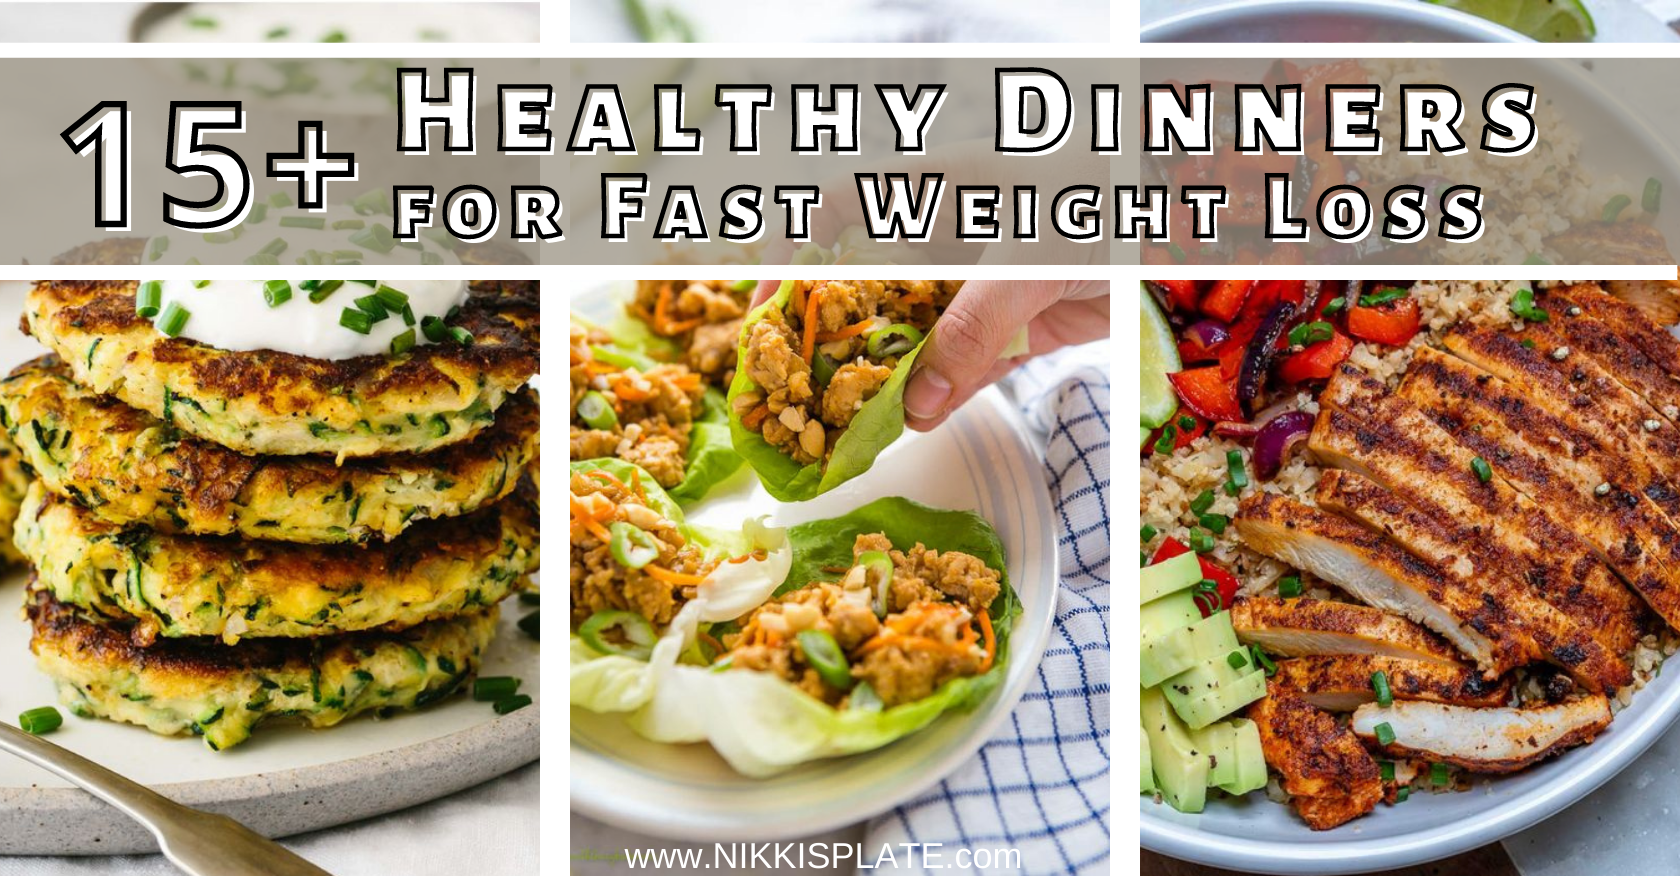 15 Healthy Dinners for Fast Weight Loss - Nikki's Plate